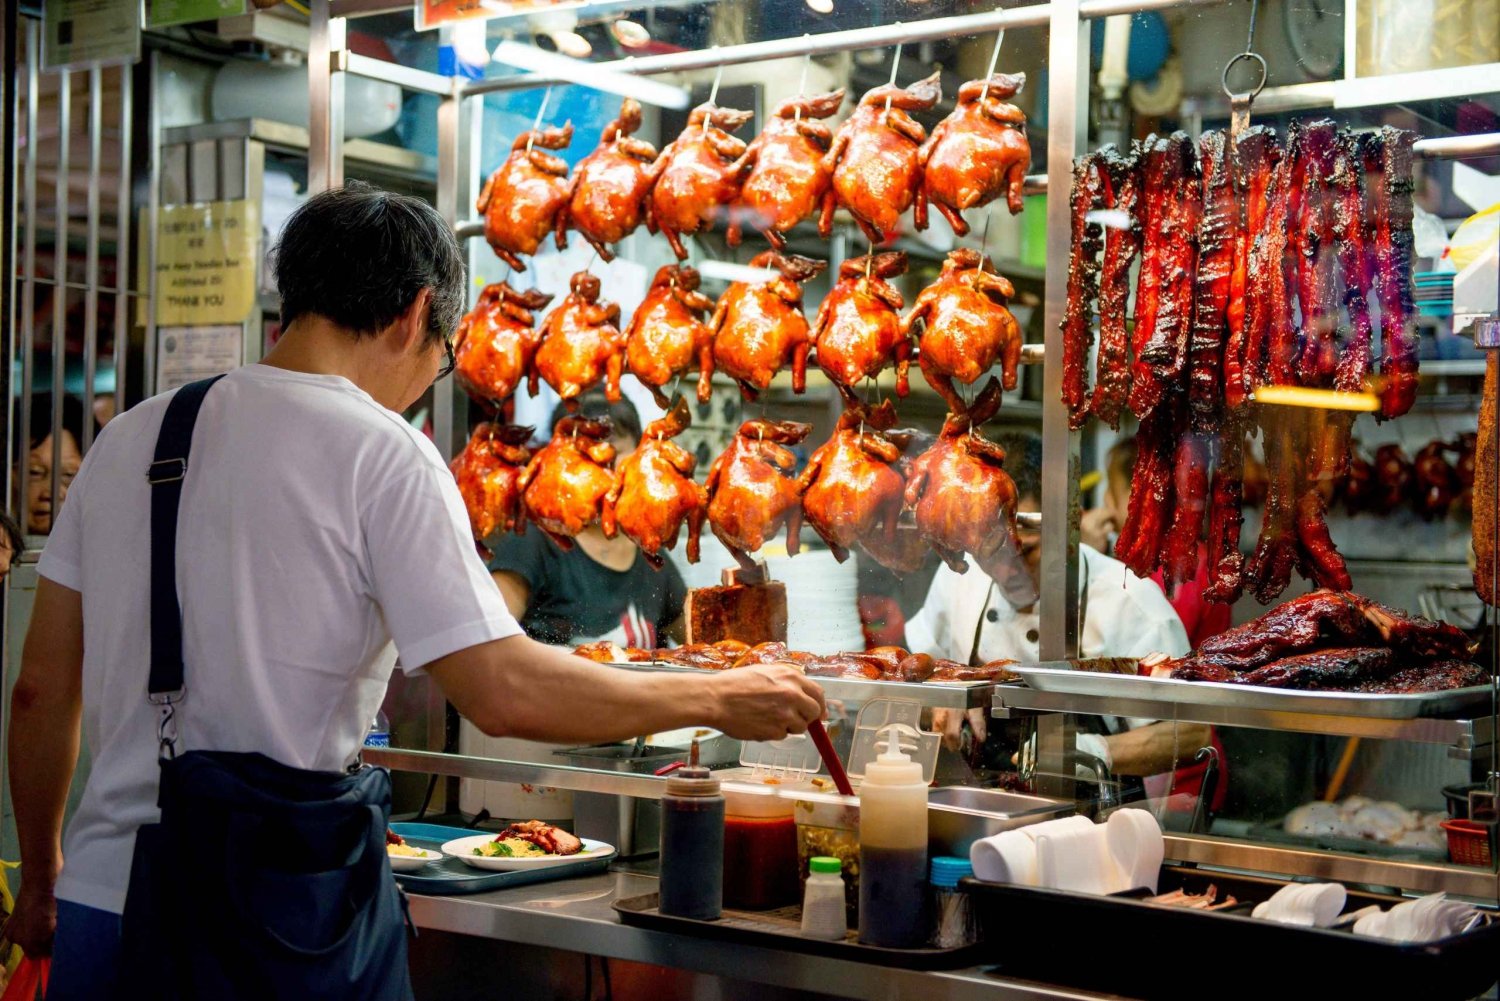 Singapore: A Gourmet Street Food Private Guided Tour